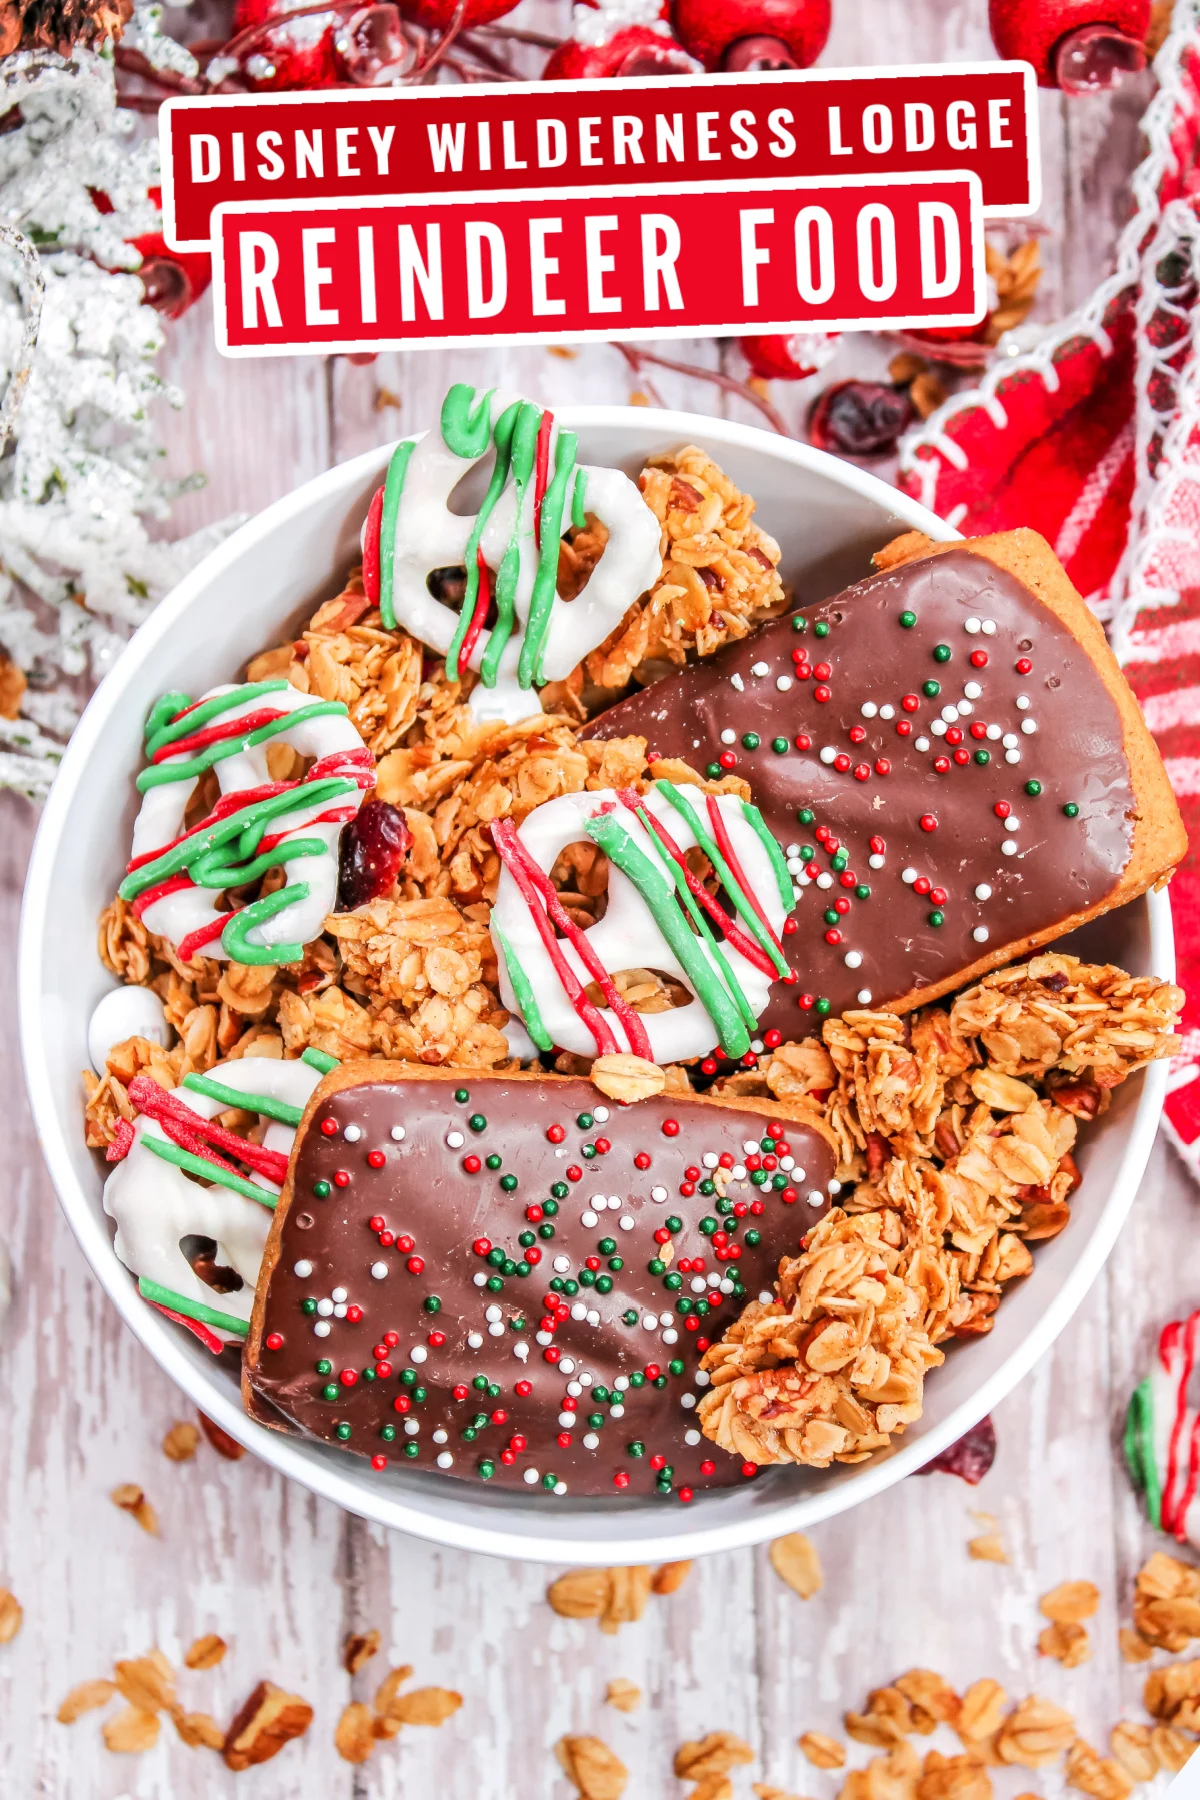 This popular Christmas recipe is inspired by Disney’s Wilderness Lodge Reindeer Food, available only during the holiday season.